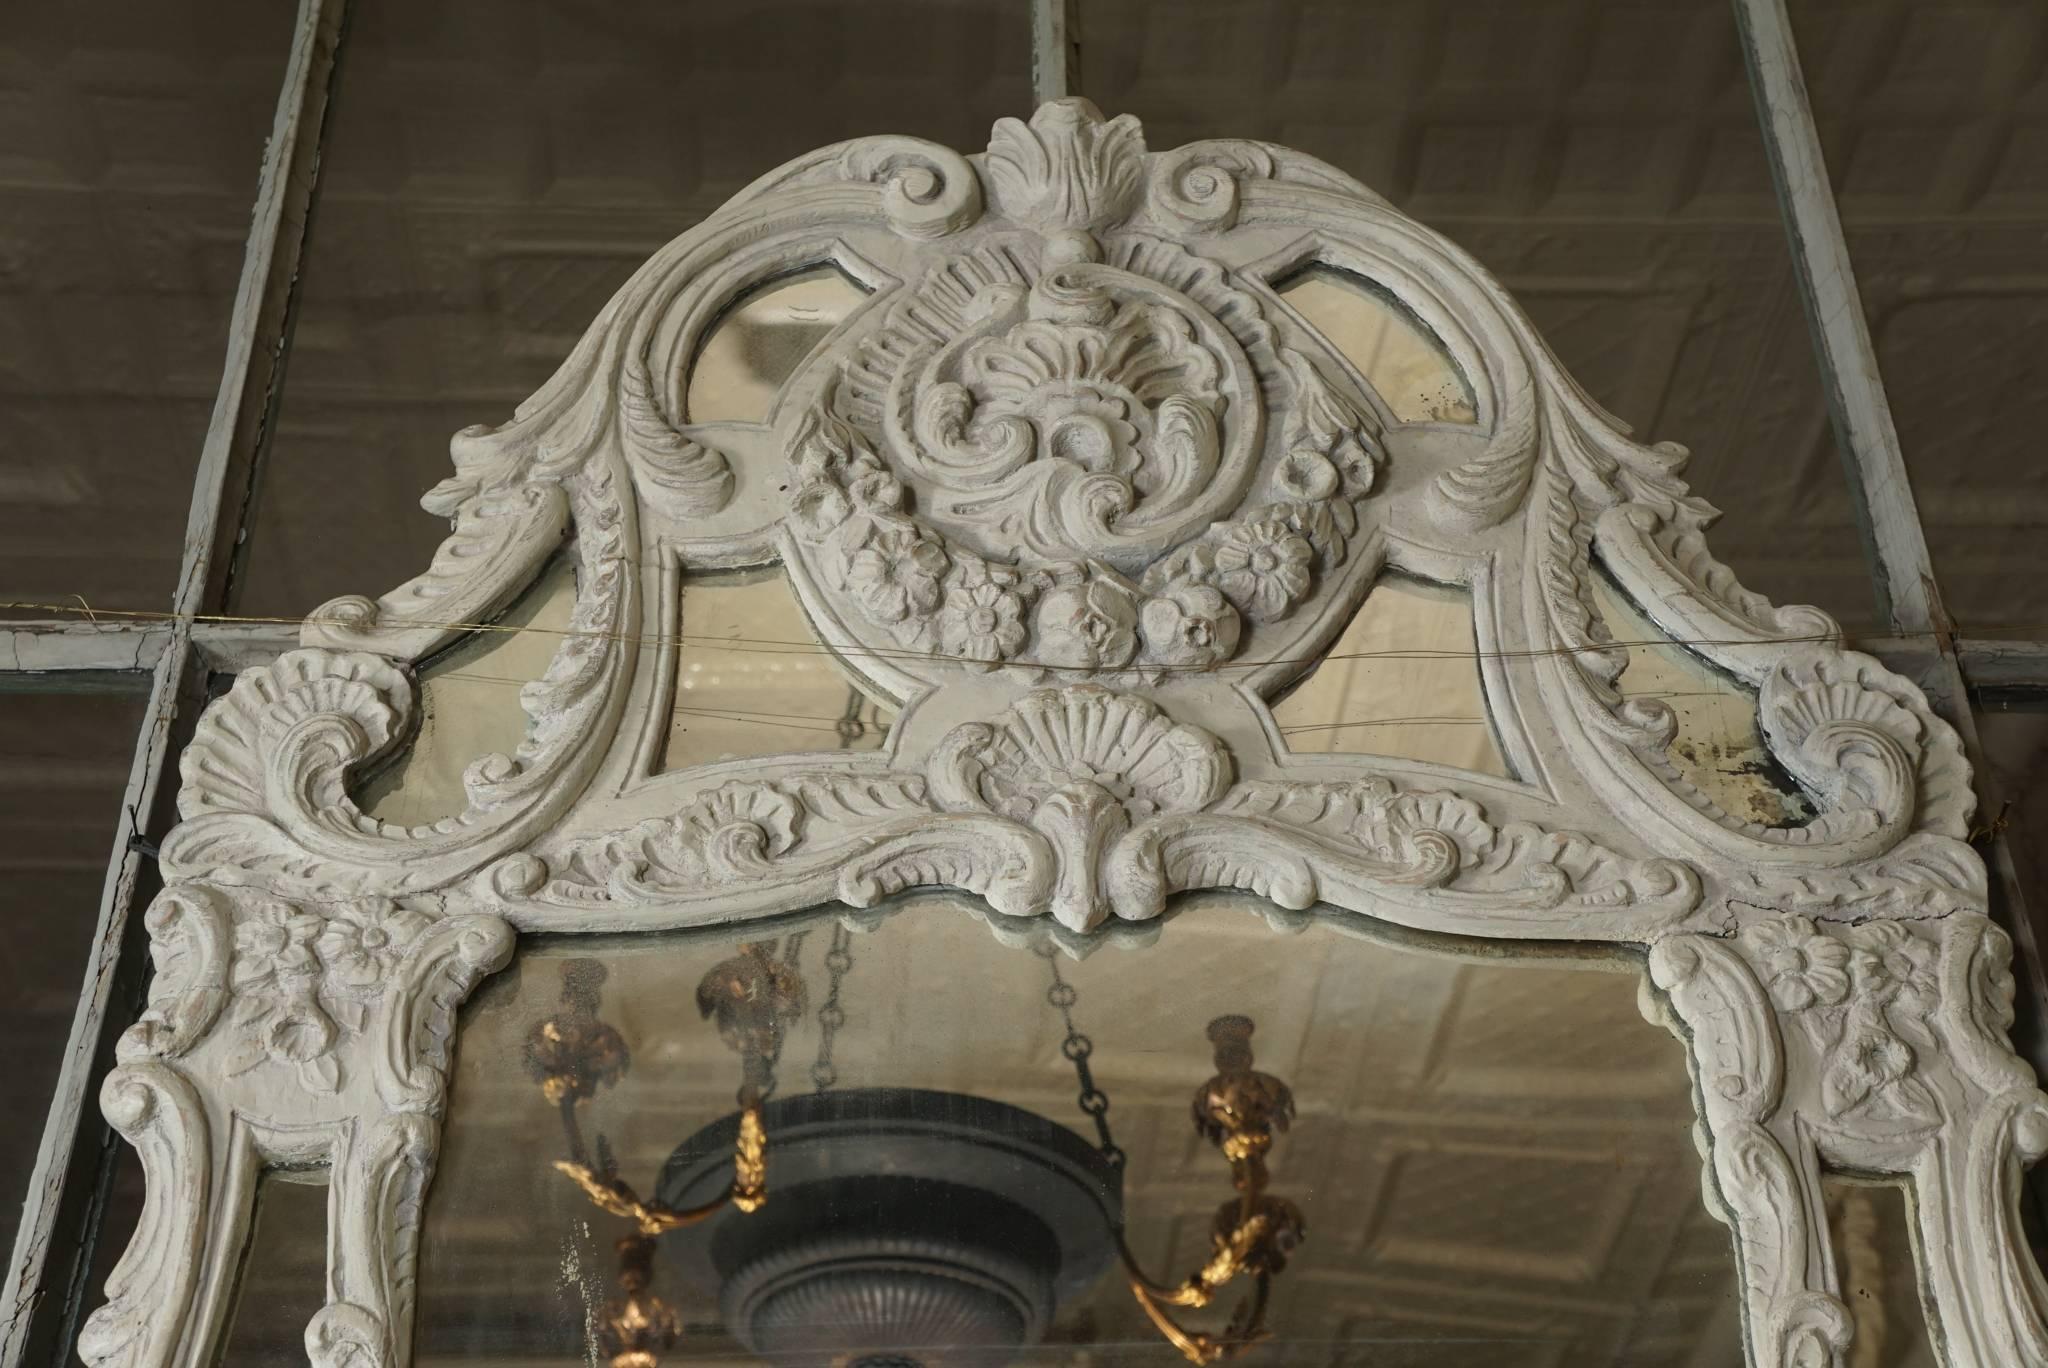 The large well-shaped frame with numerous openings showing mirror set behind, circa 1740. The frame is carved to depict cartouches composed of foliate borders and vining elements. These are made up of many s and c curved sections which will become